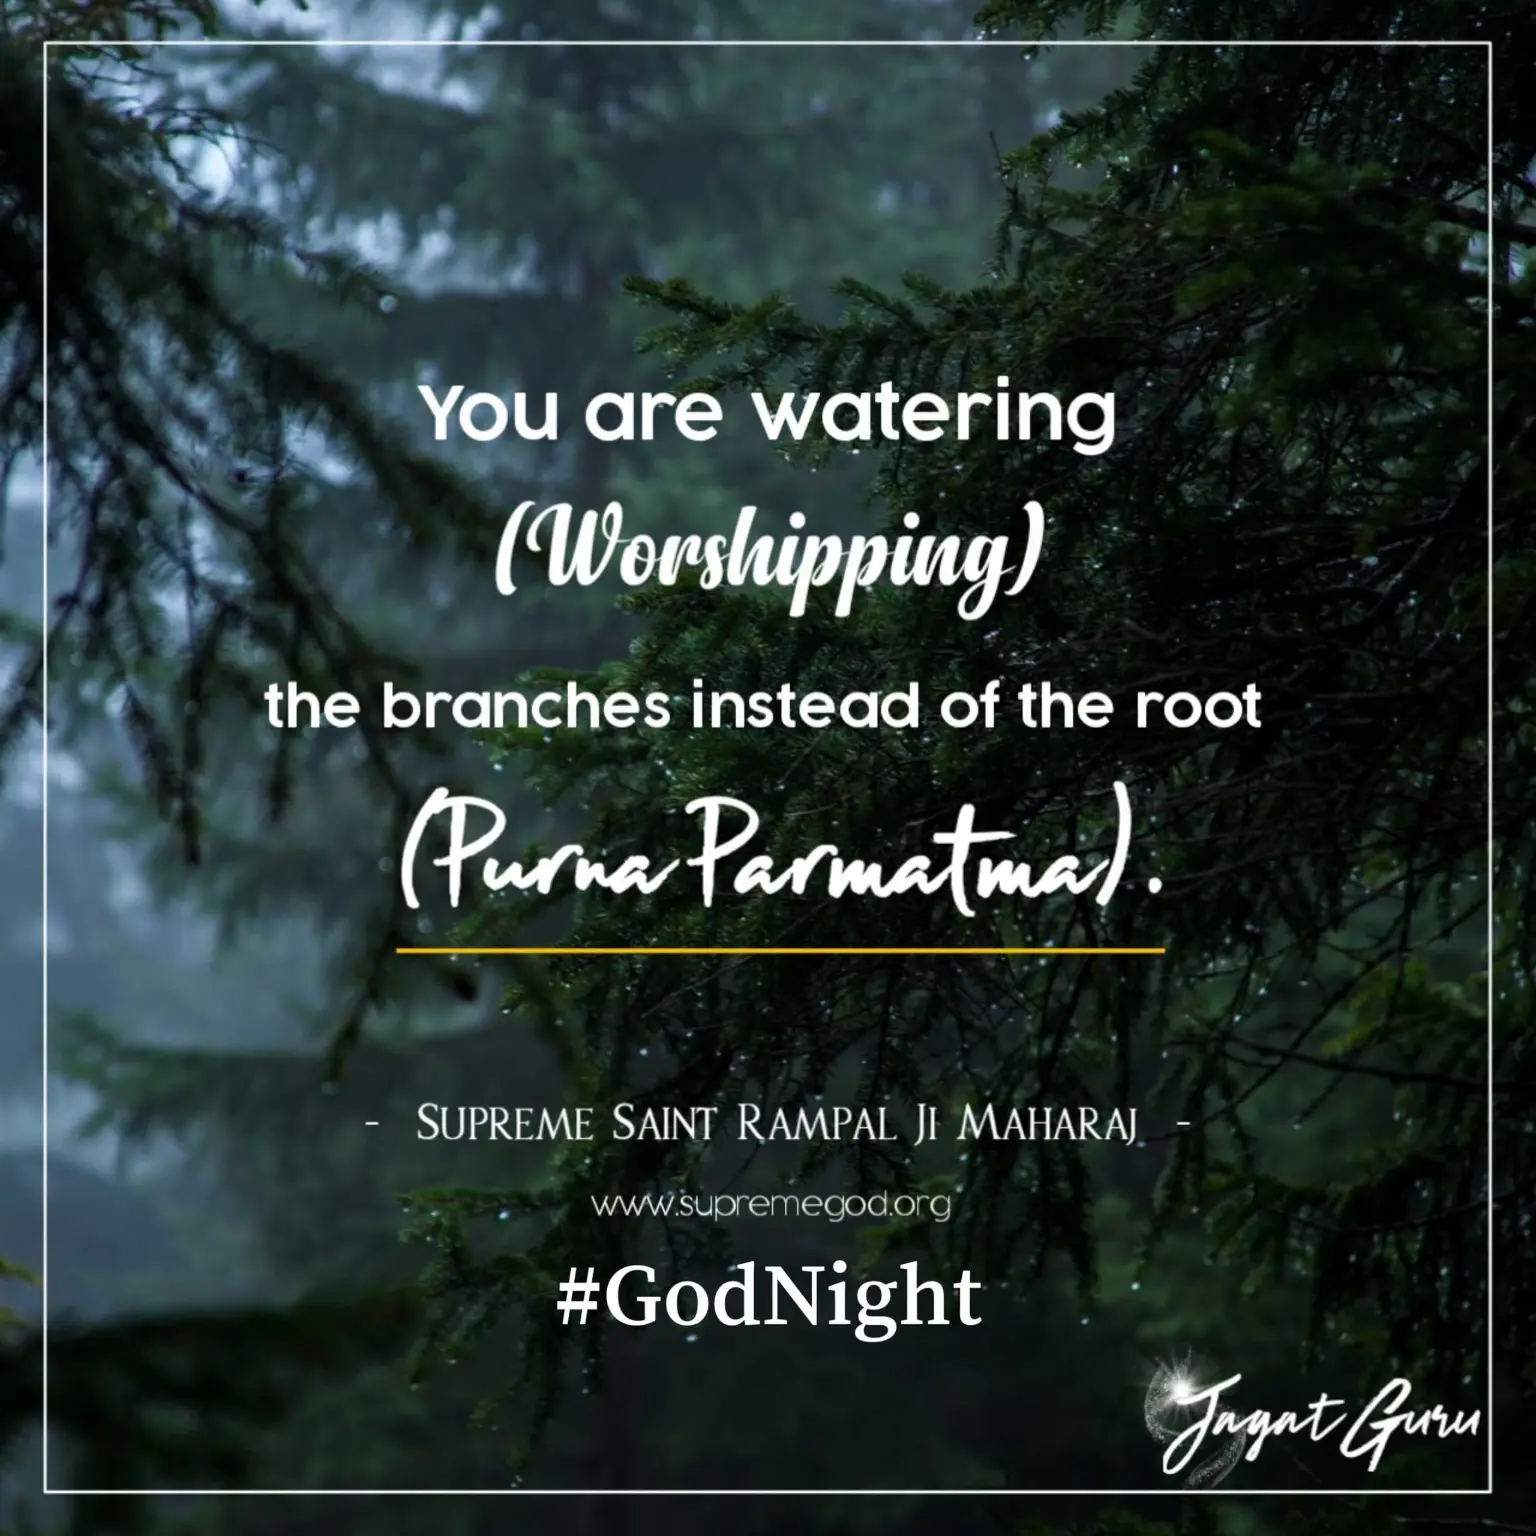 You are watering(worshipping) the branches instead of the root( puran parmatma). #SaintRampalJiQuote #SantRampalJiMaharaj #Quotes #QuotesSantRampalJi